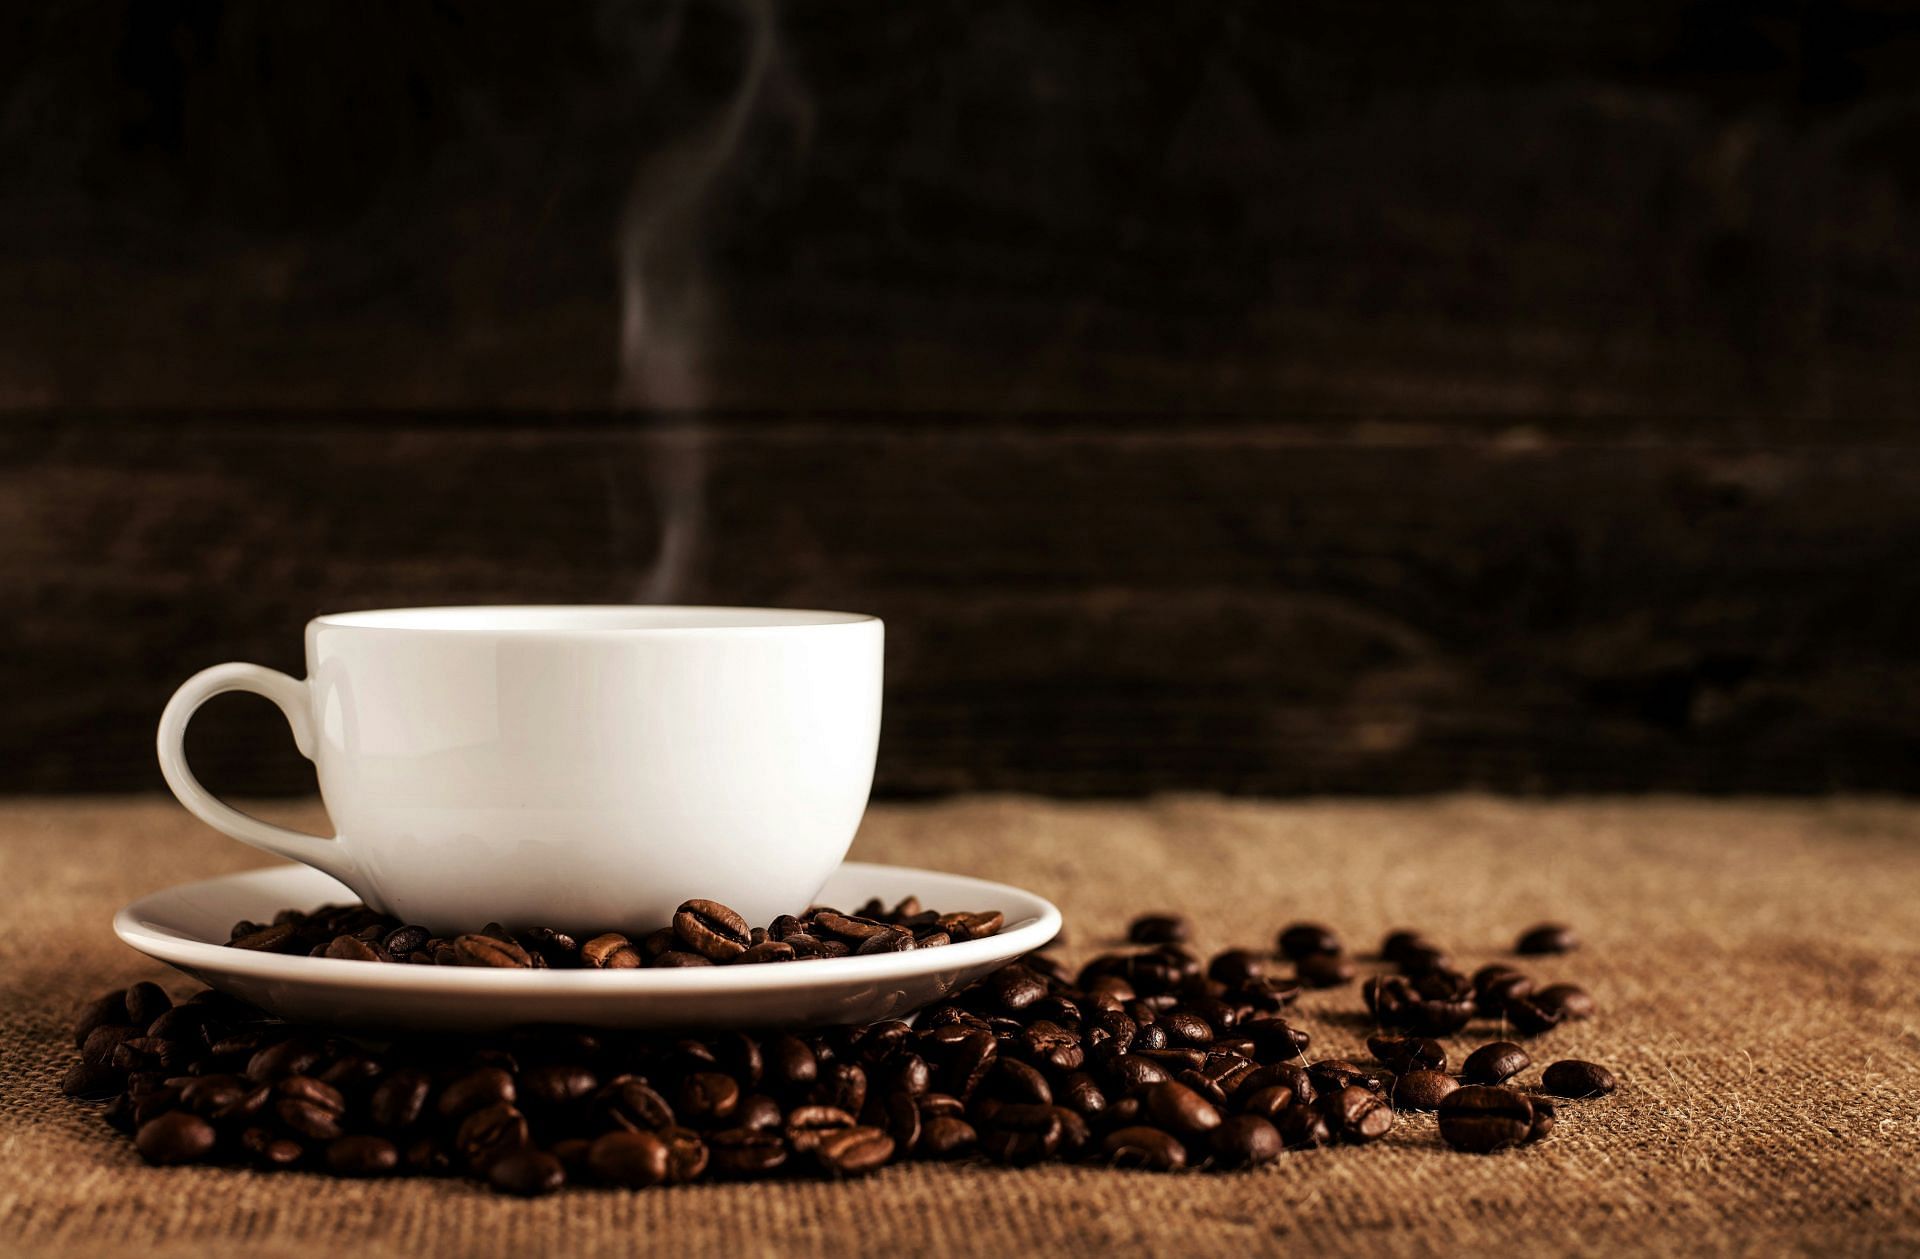 Caffeine and chest pain: How much is too much? (Image by Mike Kenneally/Unsplash)